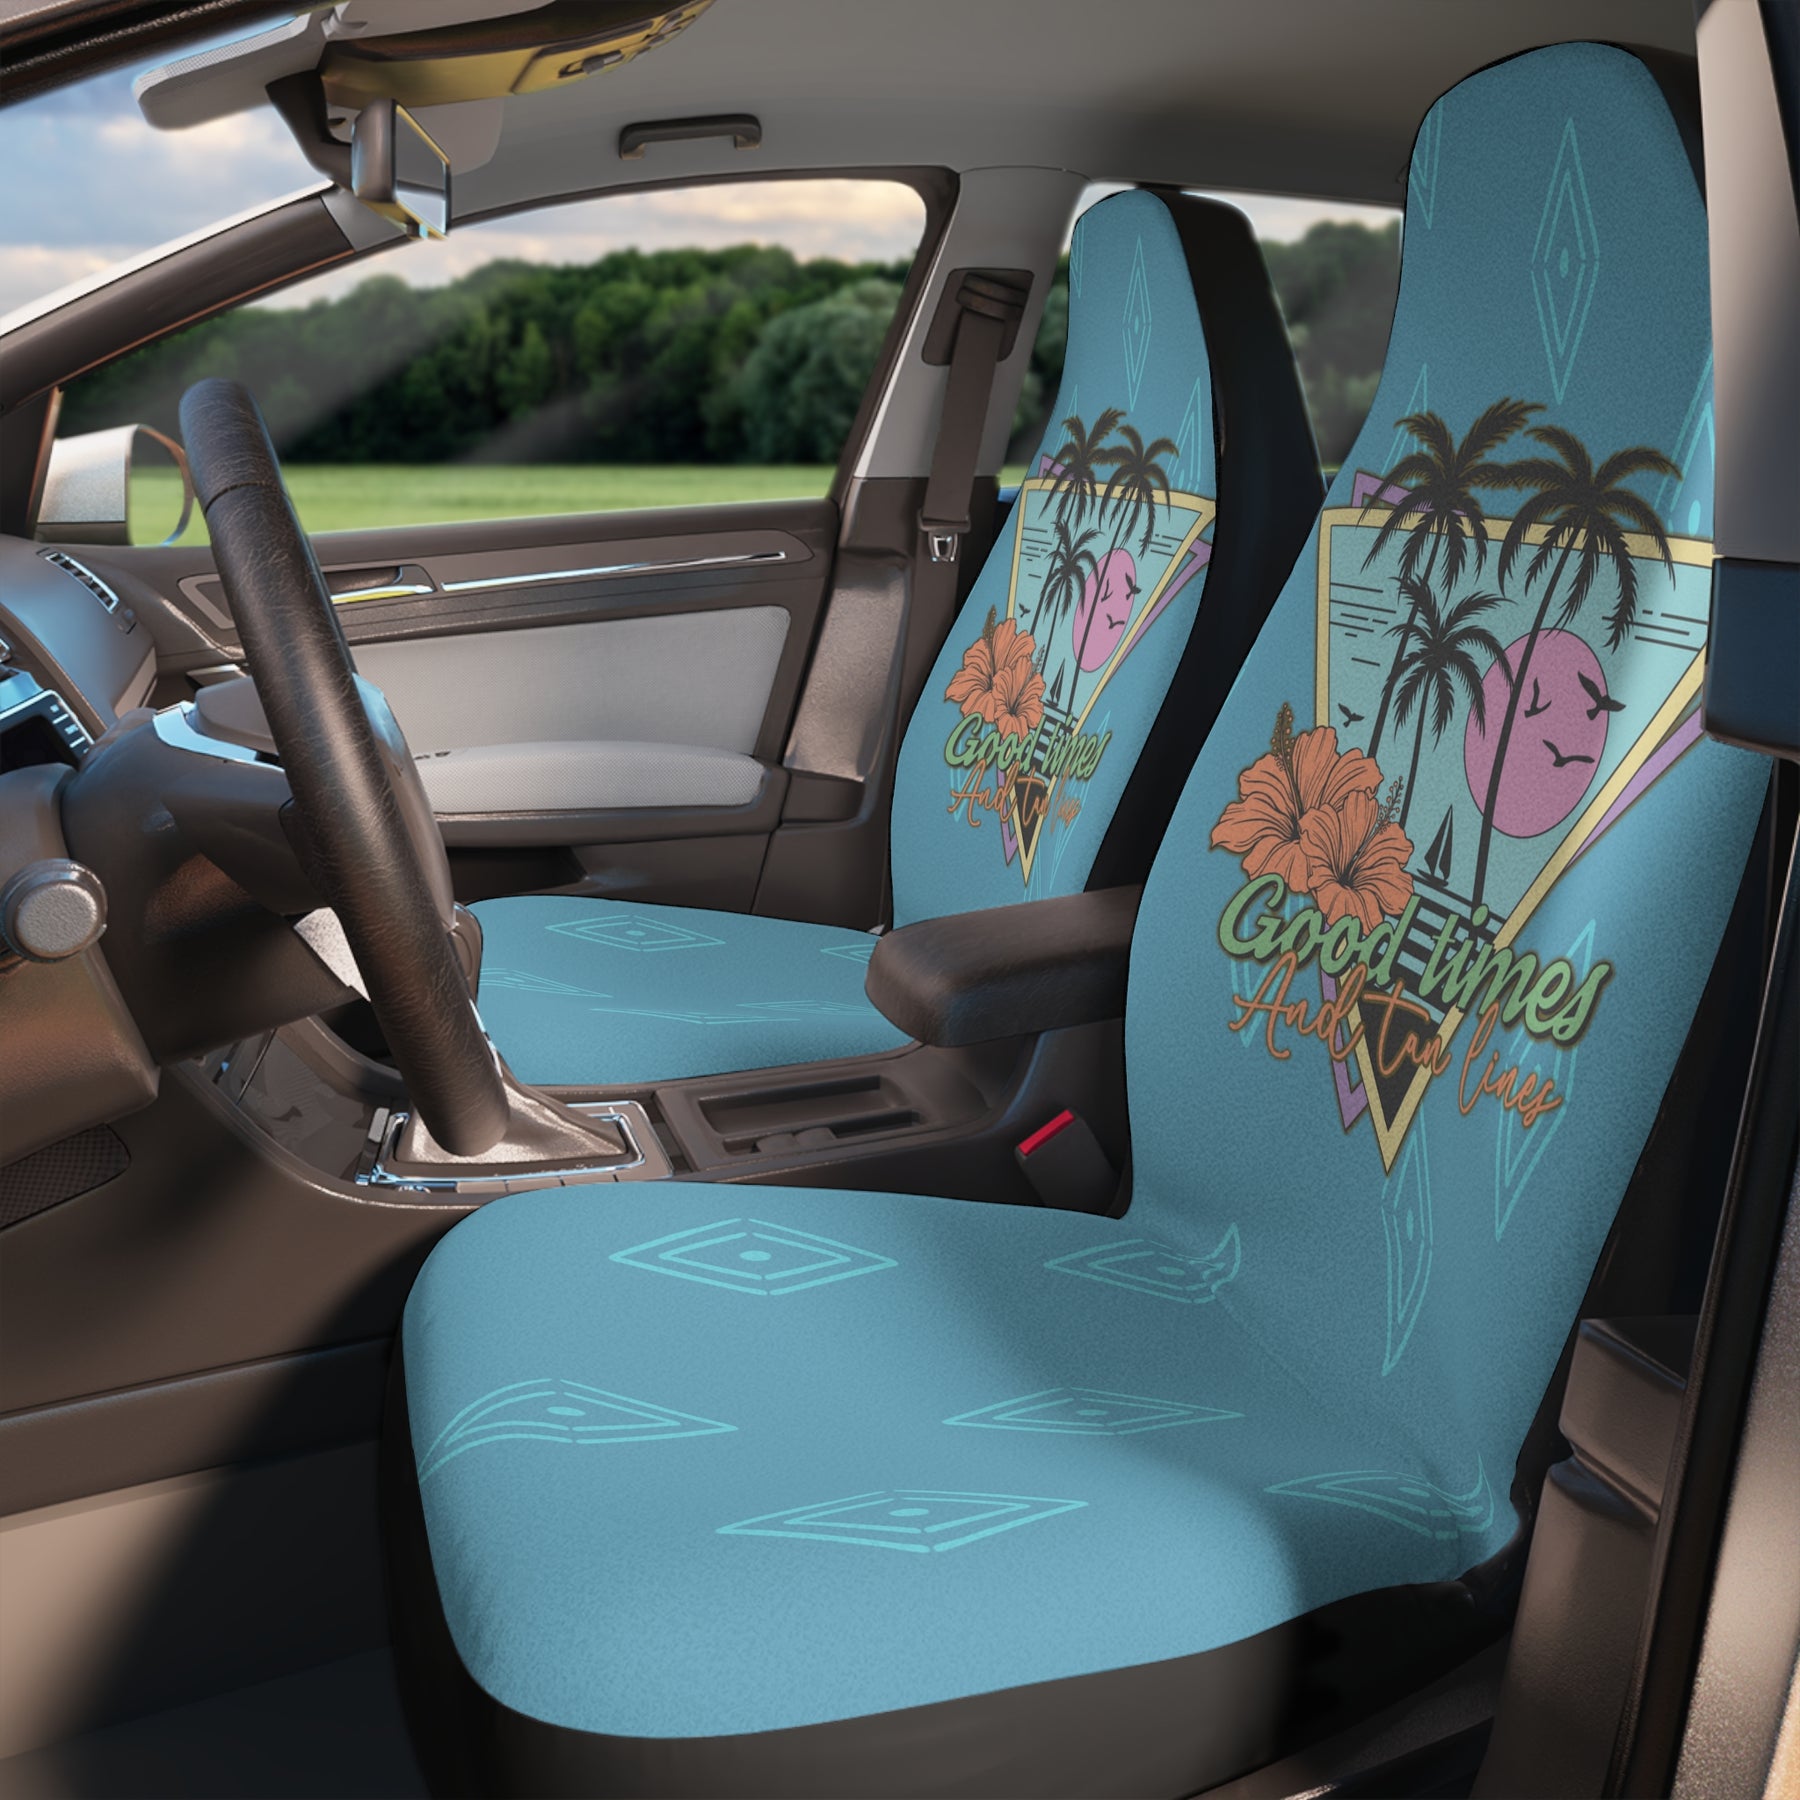 Teal Hippie Car Seat Covers Set,Vintage Aesthetic Car Seat Covers,Summer Beach Vibe Car Decor,Funky Car Interior Decoration,Car Accessory